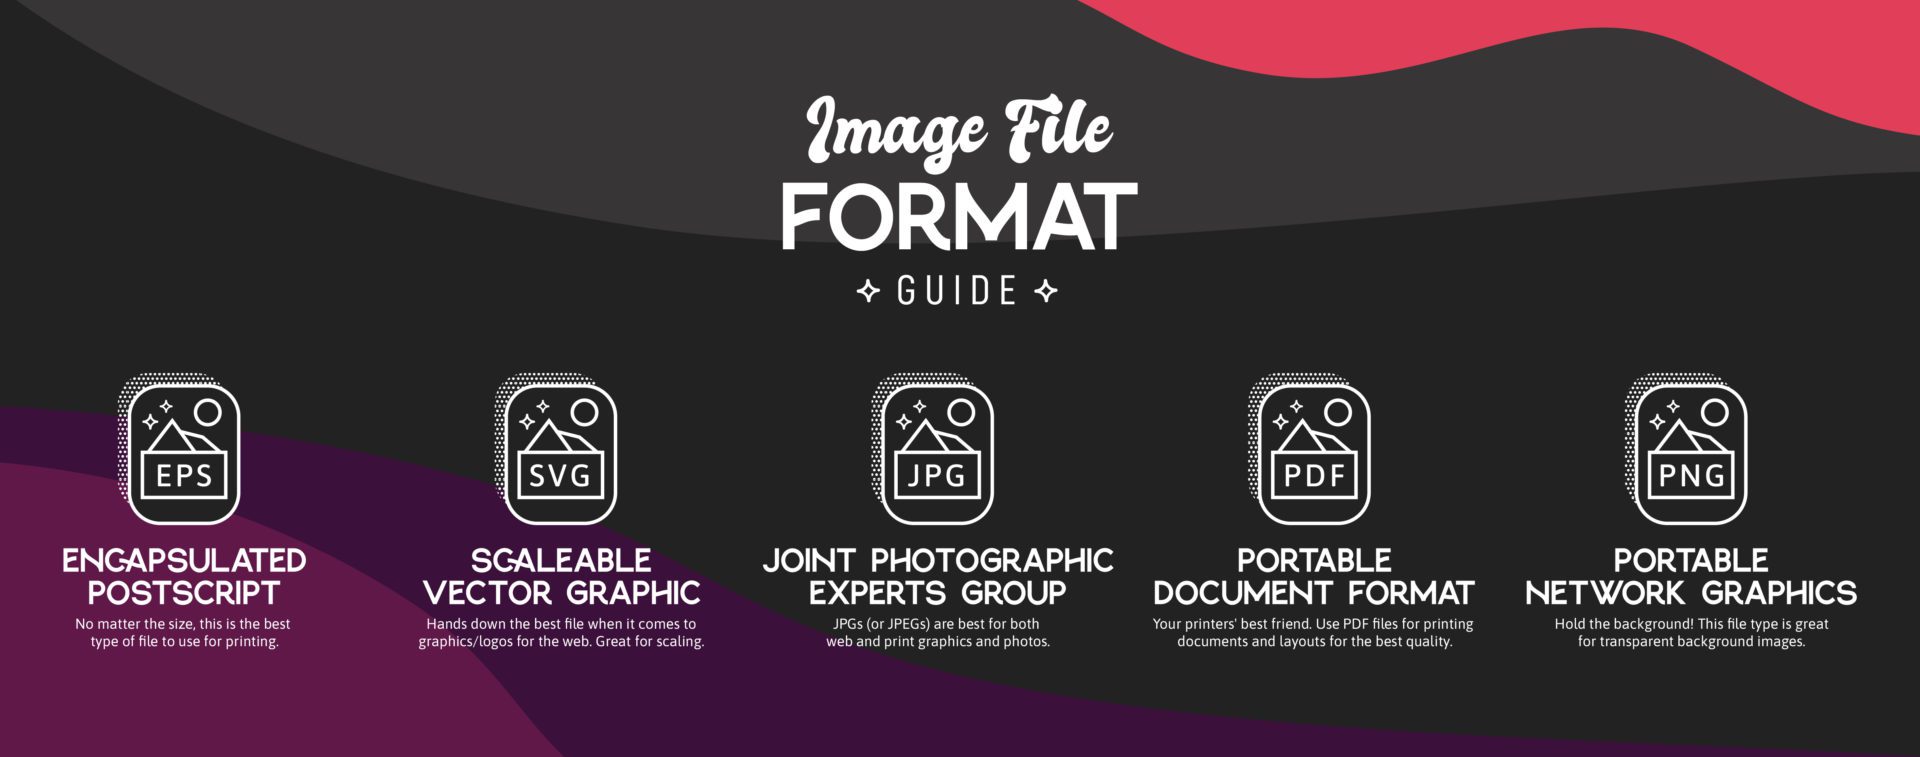 image file format guide graphic